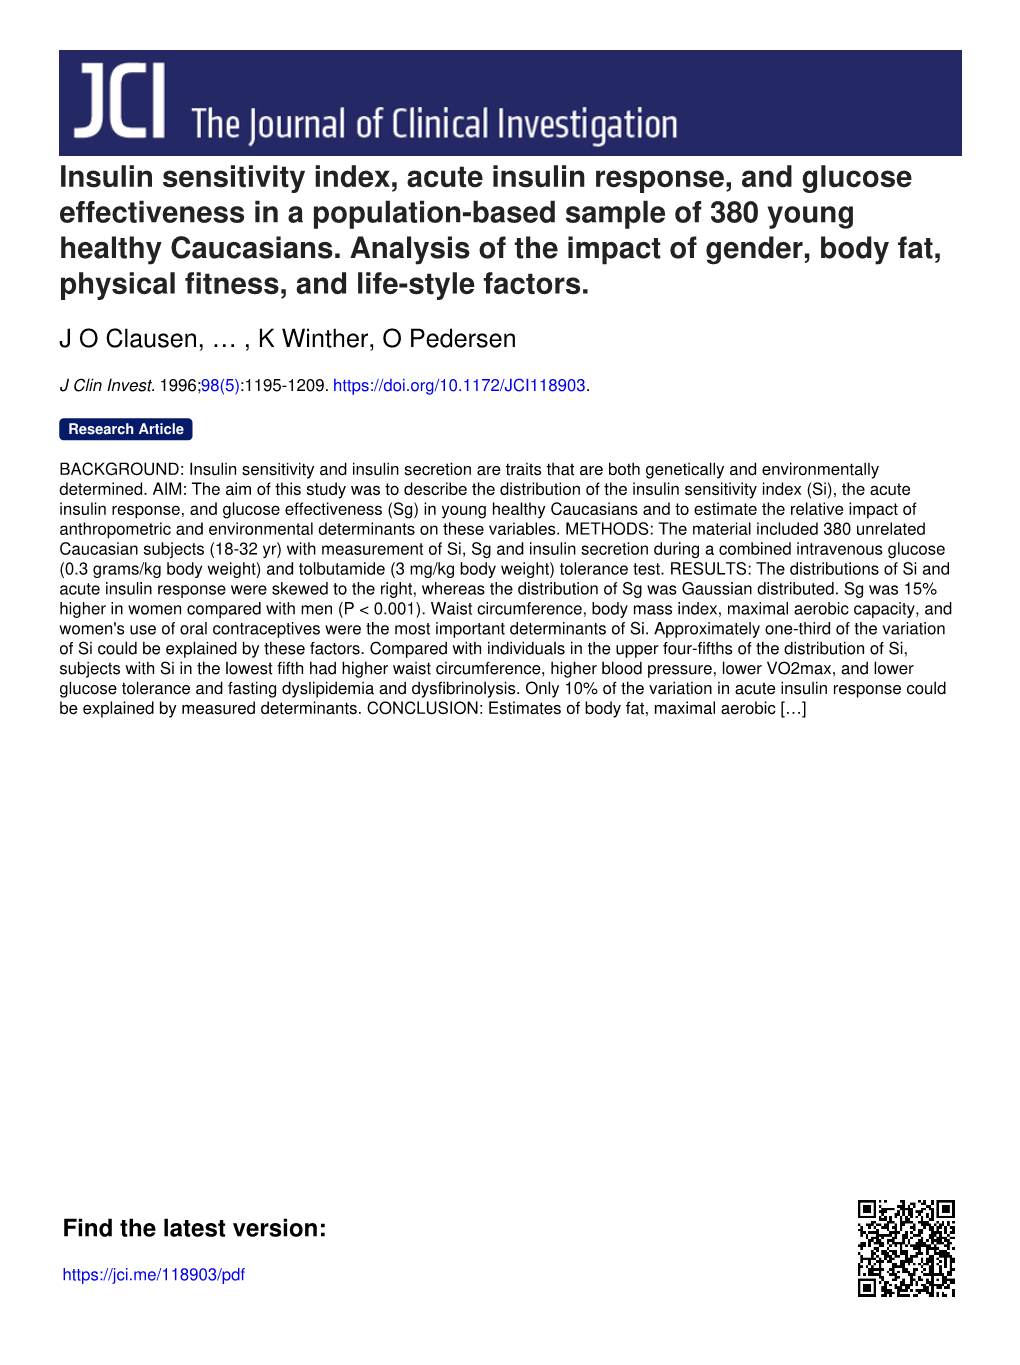 Insulin Sensitivity Index, Acute Insulin Response, and Glucose Effectiveness in a Population-Based Sample of 380 Young Healthy Caucasians